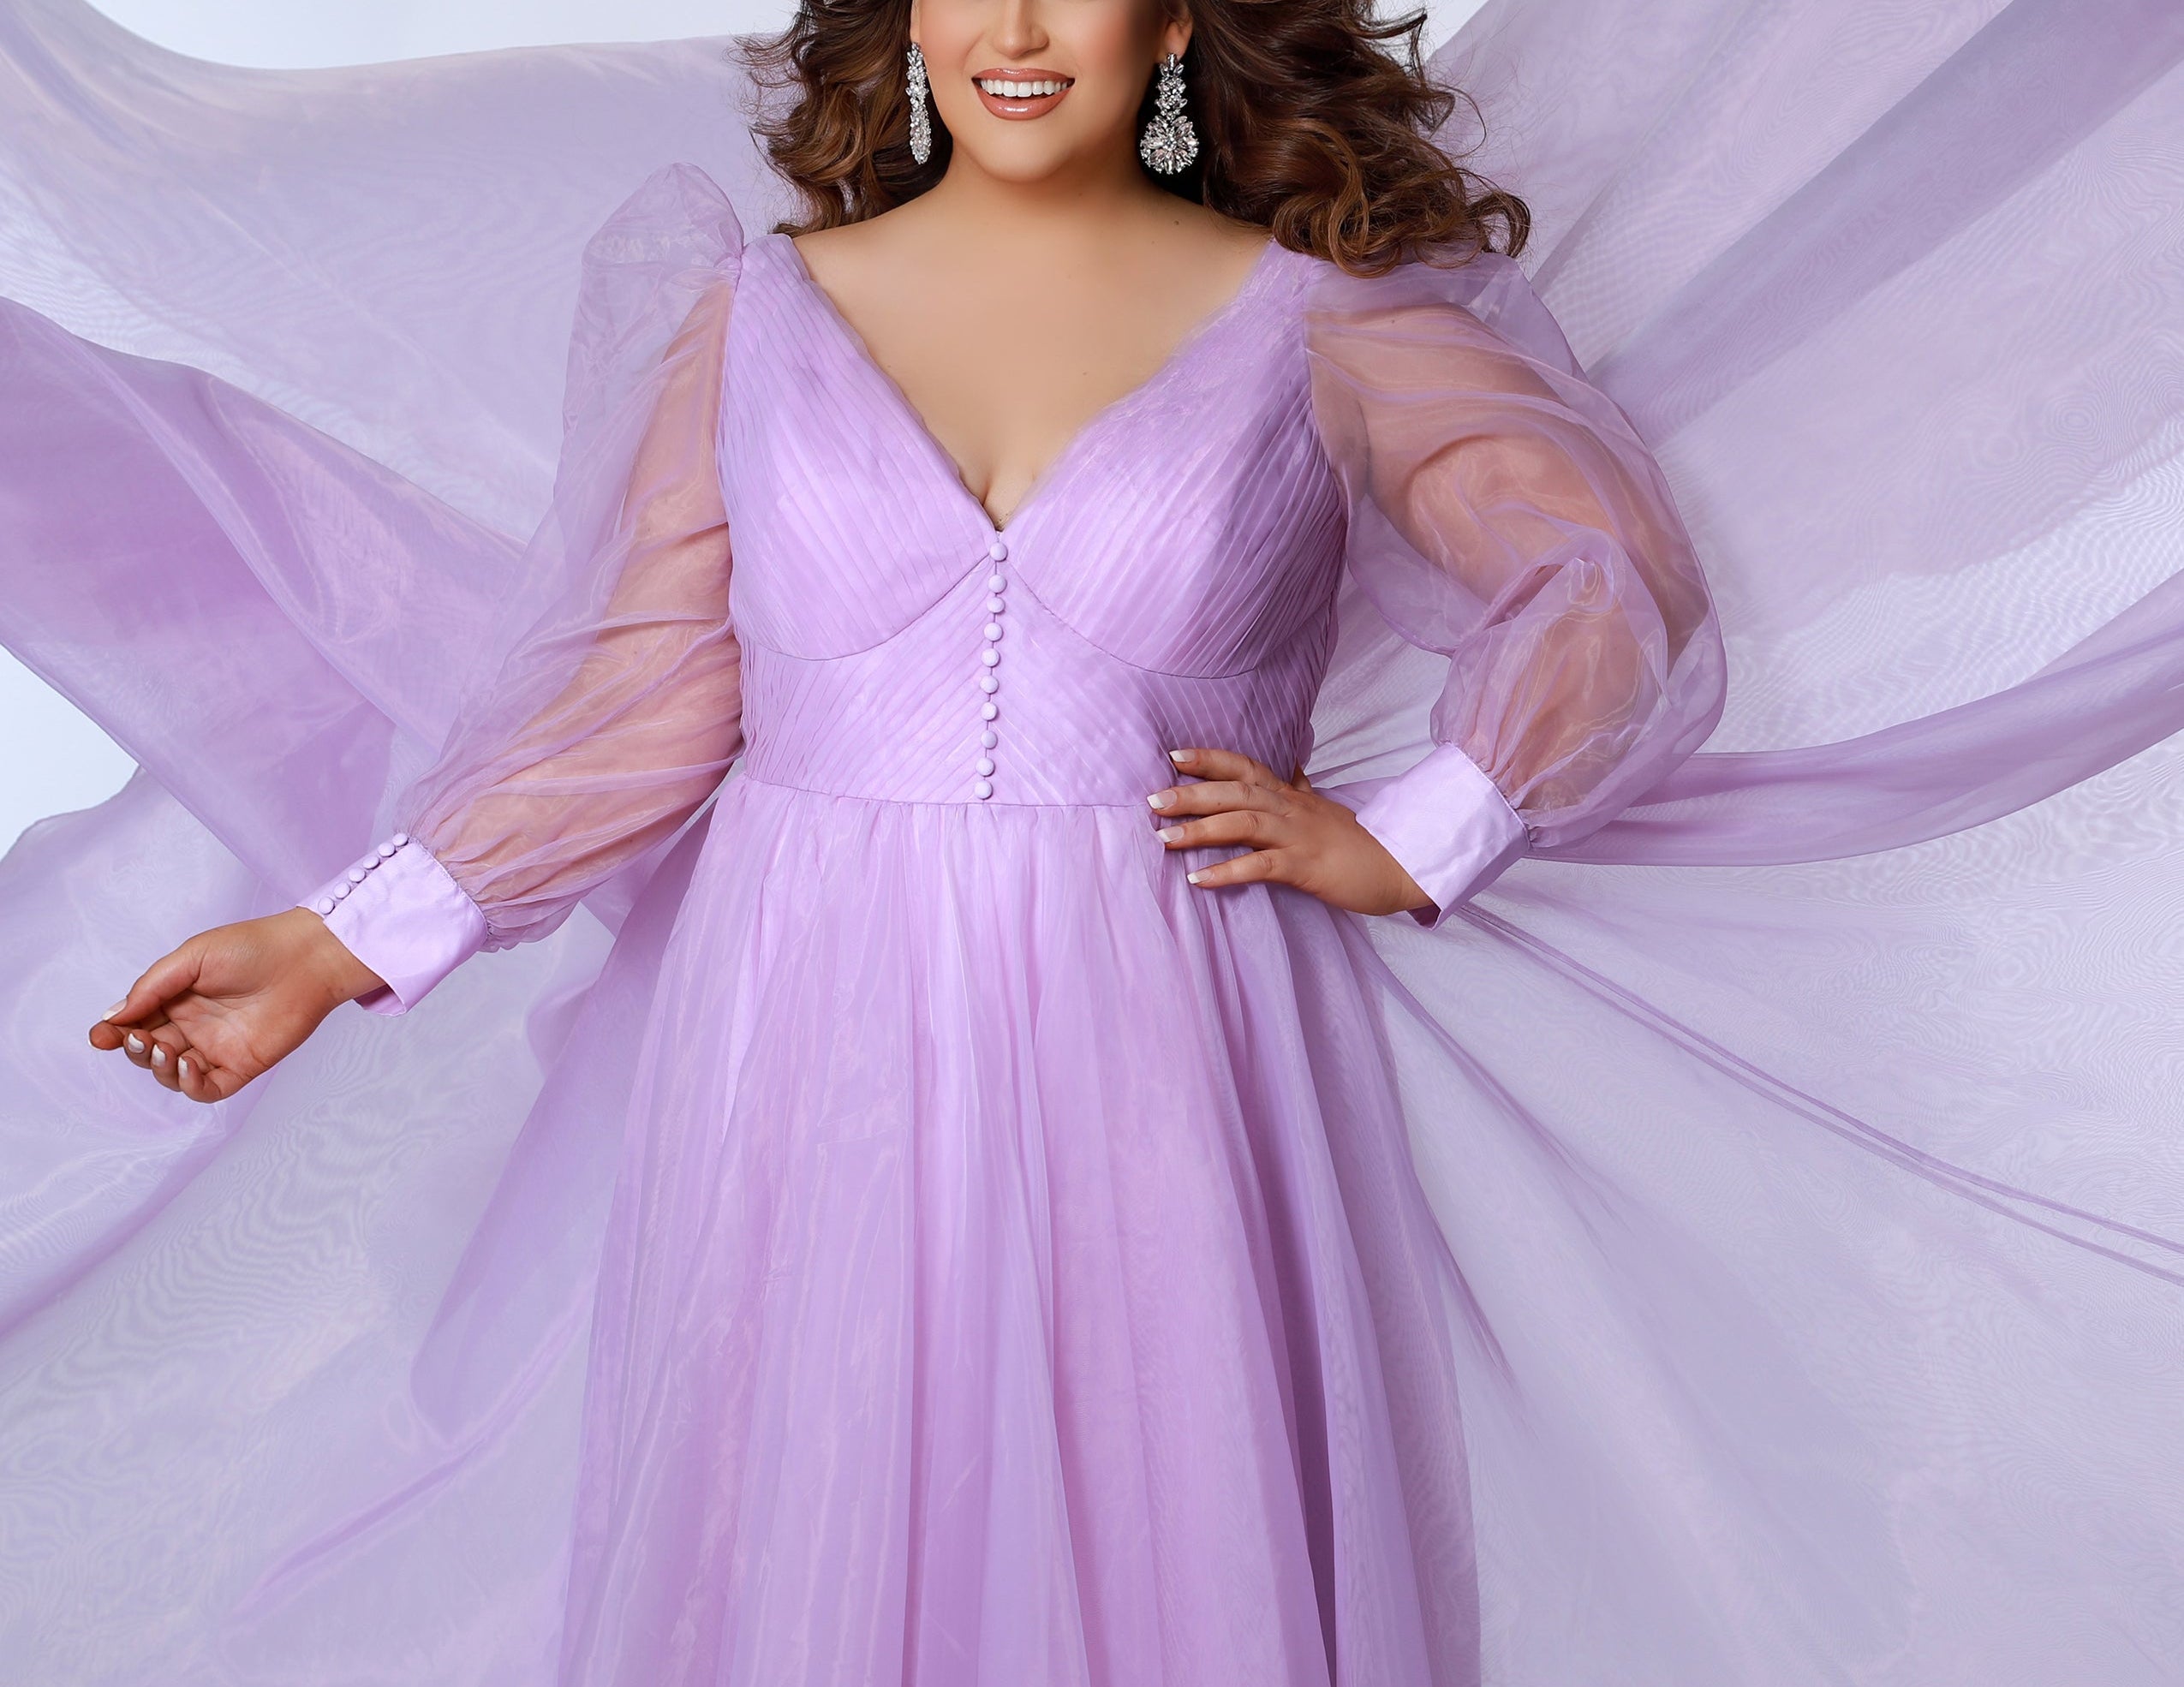 JK2317 plus size organza evening gown.  V-neckline, puff sleeves with cuff, pleated organza bodice and sweep train. Available in lilac purple, sky blue and diamond white. Johnathan Kayne for Sydney's Closet. Photographer Georgina Vaughan 